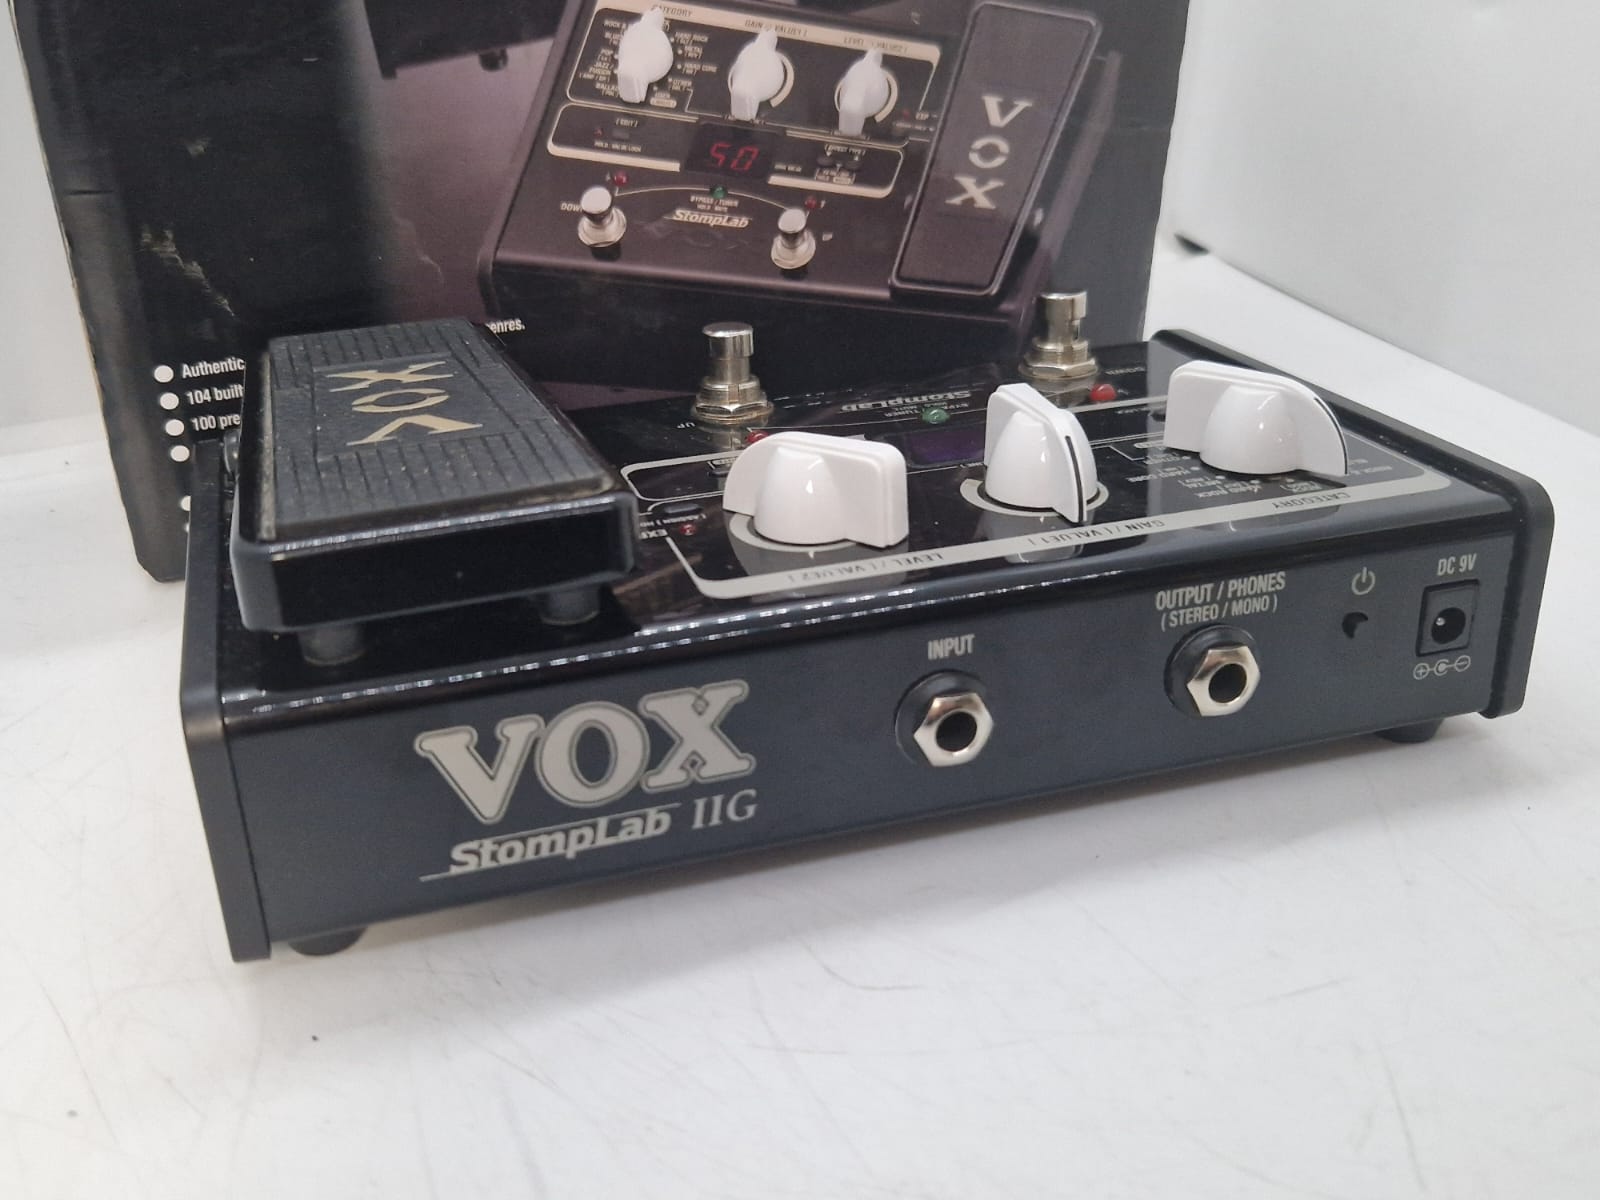 Vox StompLab 2G Multi-Effects Guitar Pedal